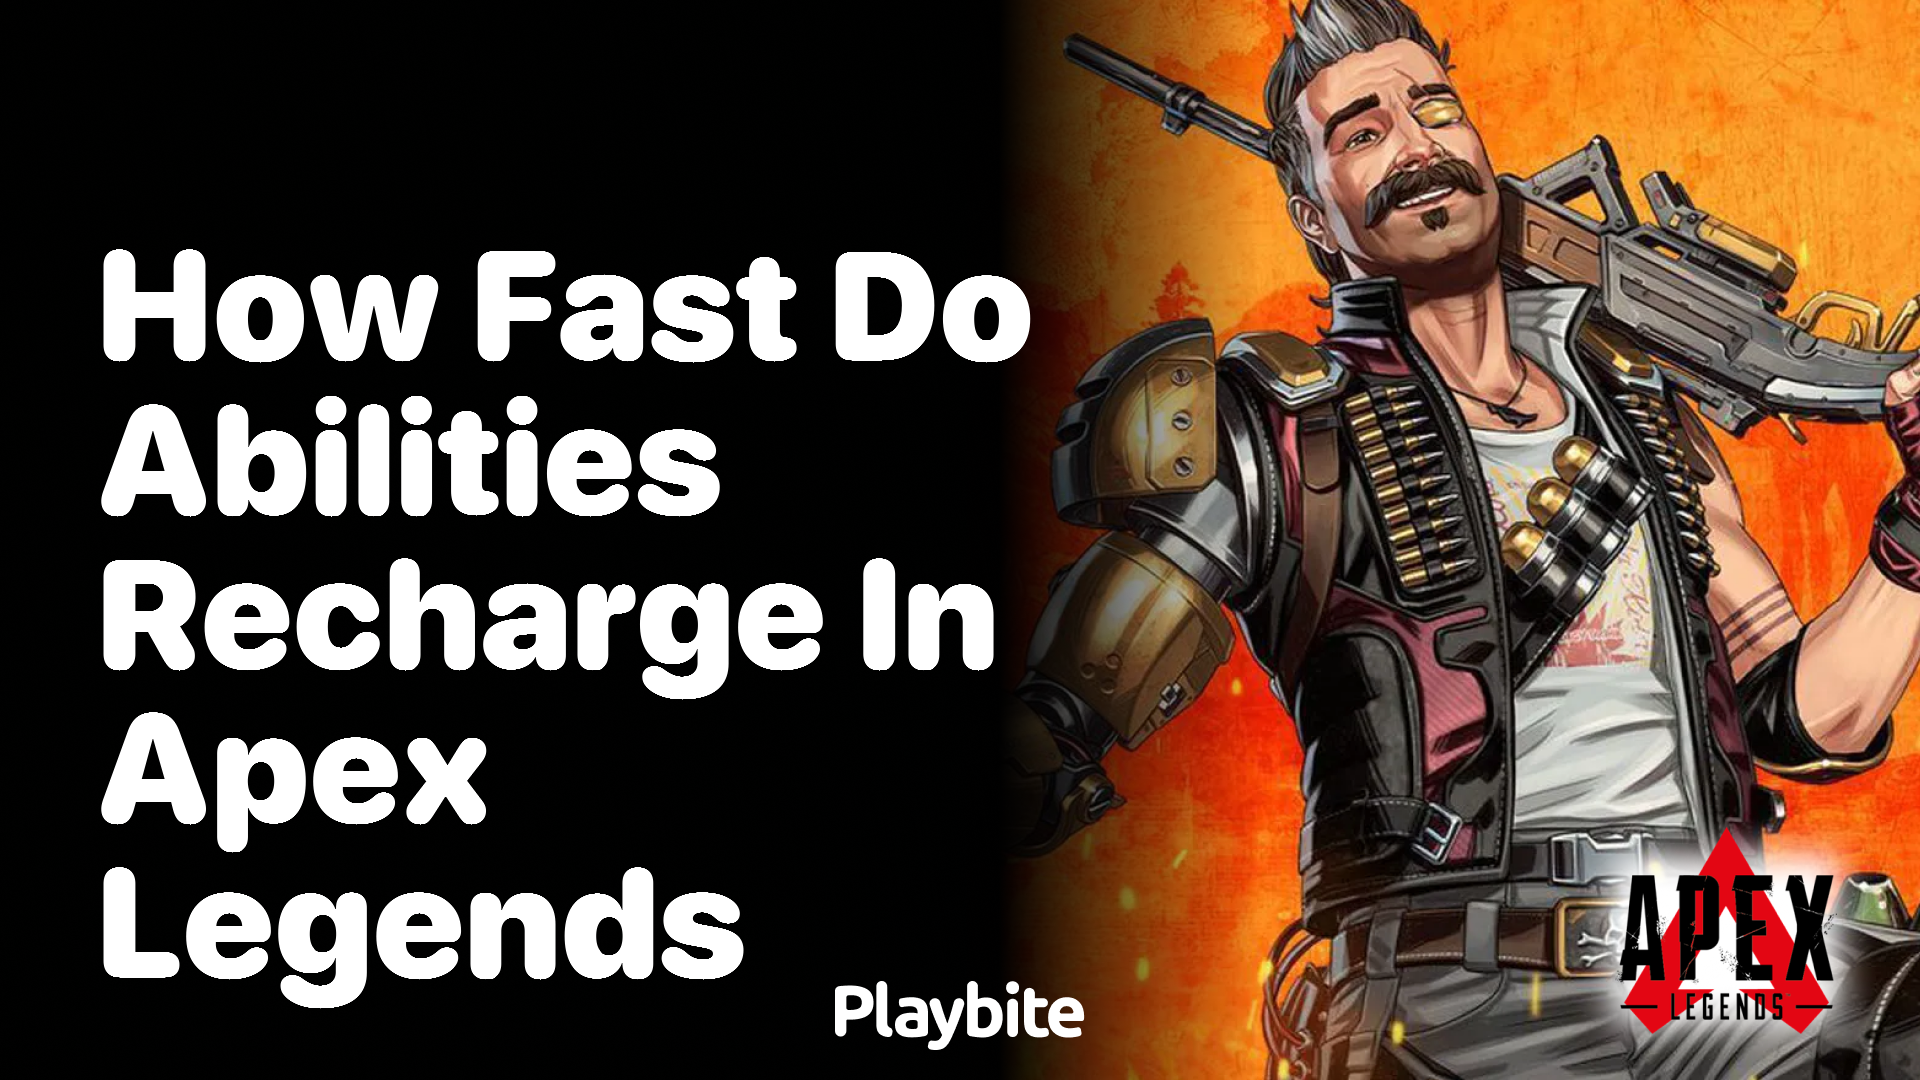 How fast do abilities recharge in Apex Legends?